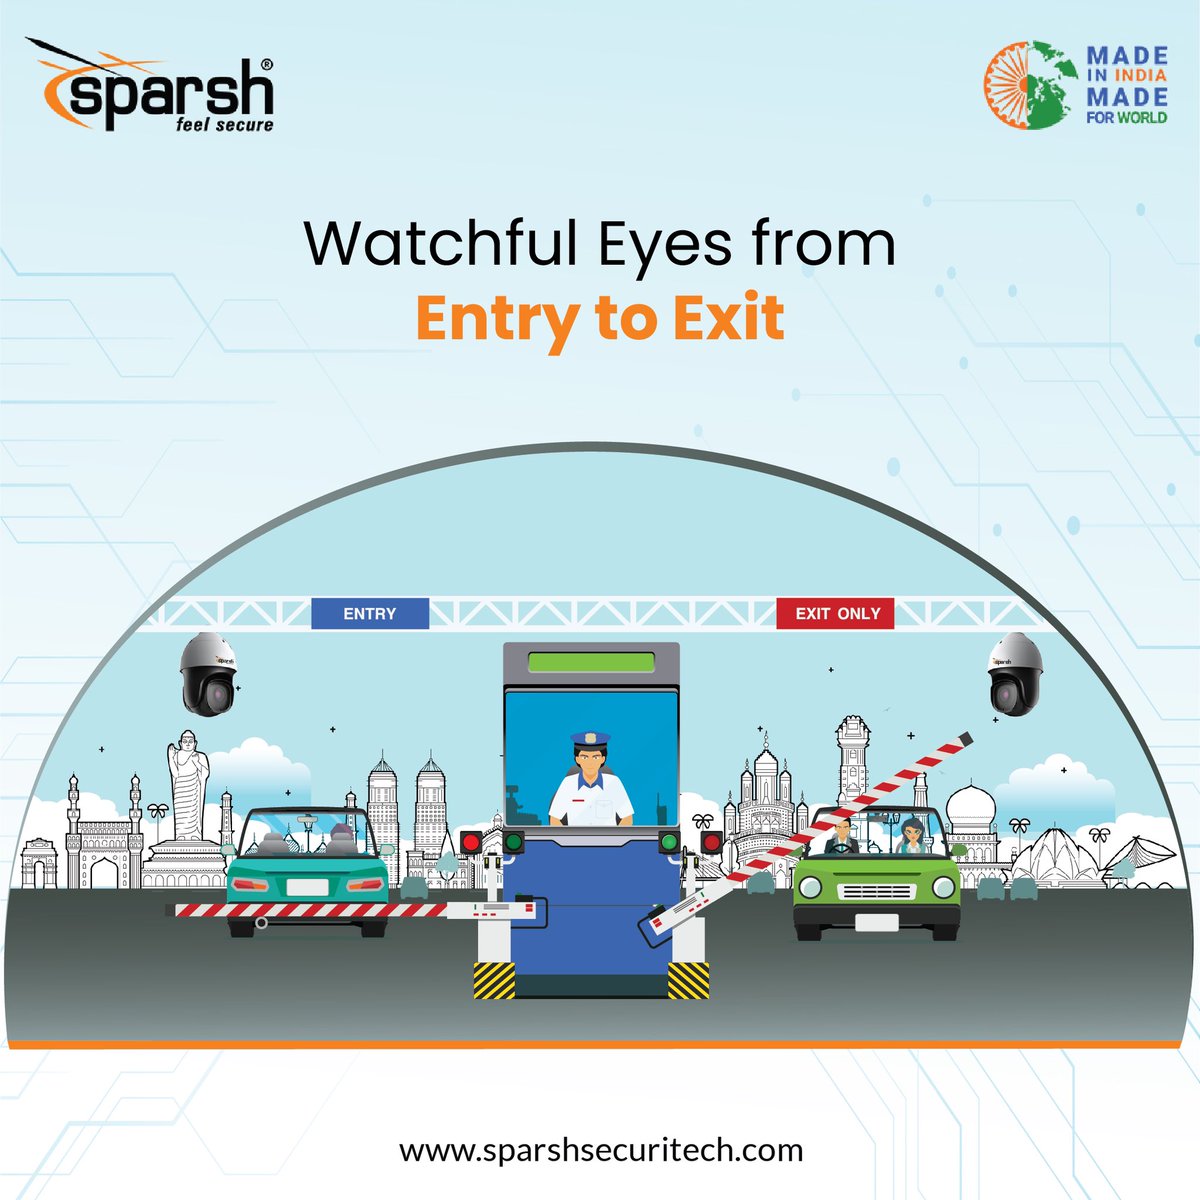 Securing Every Entry and Exit Point: Enhance surveillance with our PTZ camera.

#sparshcct #madeinindia  #SafeAndSecureIndia #CCTVSecurity #PTZCamera #SurveillanceSystem #EntryExitMonitoring #SecurityCameras #VideoSurveillance #PTZTechnology #CCTVMonitoring #SecuritySolution